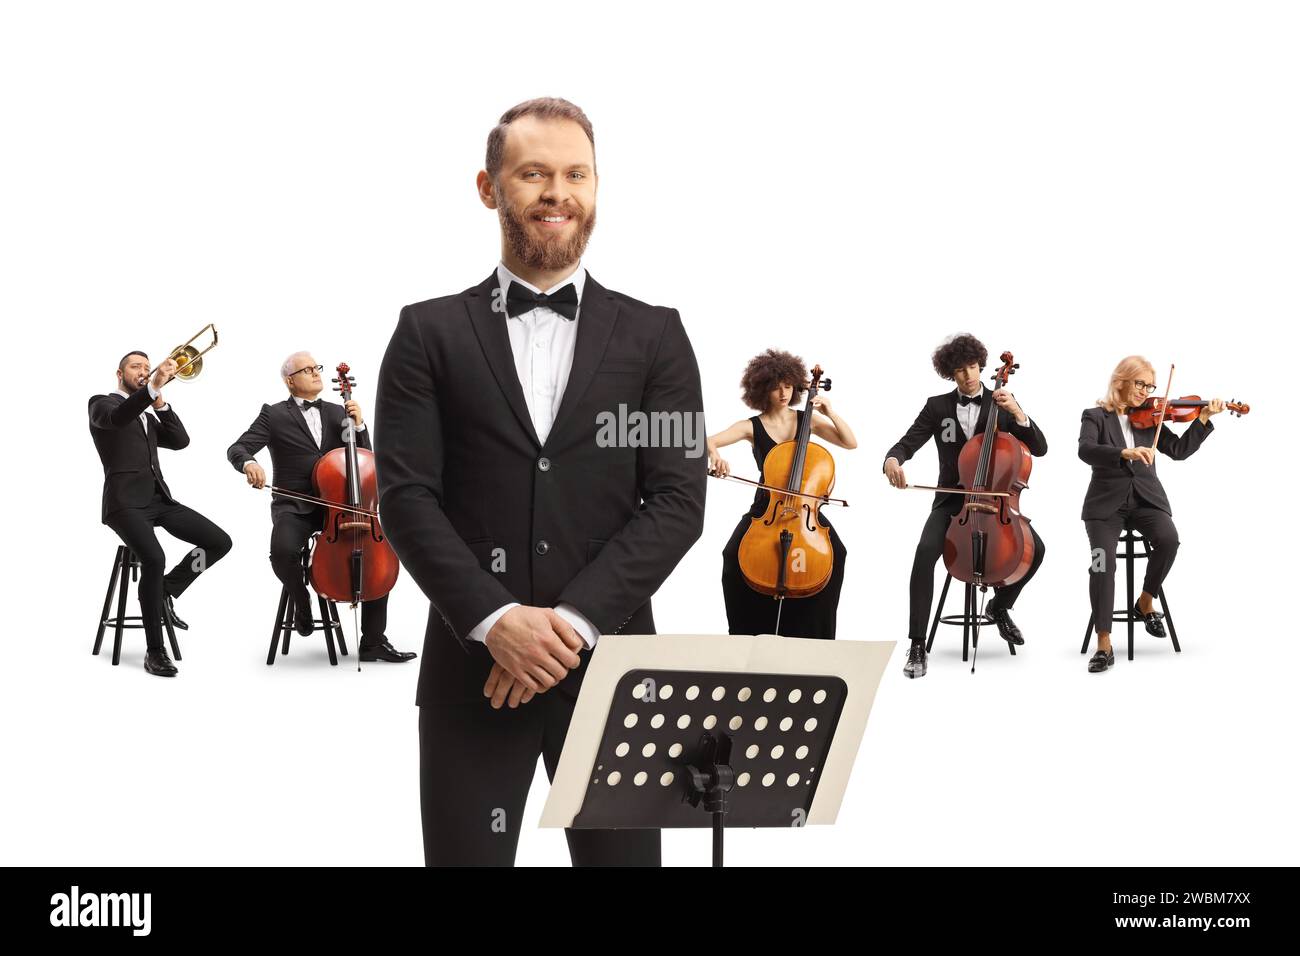 Conductor posing in front of a philharmonic orchestra isolated on white background Stock Photo